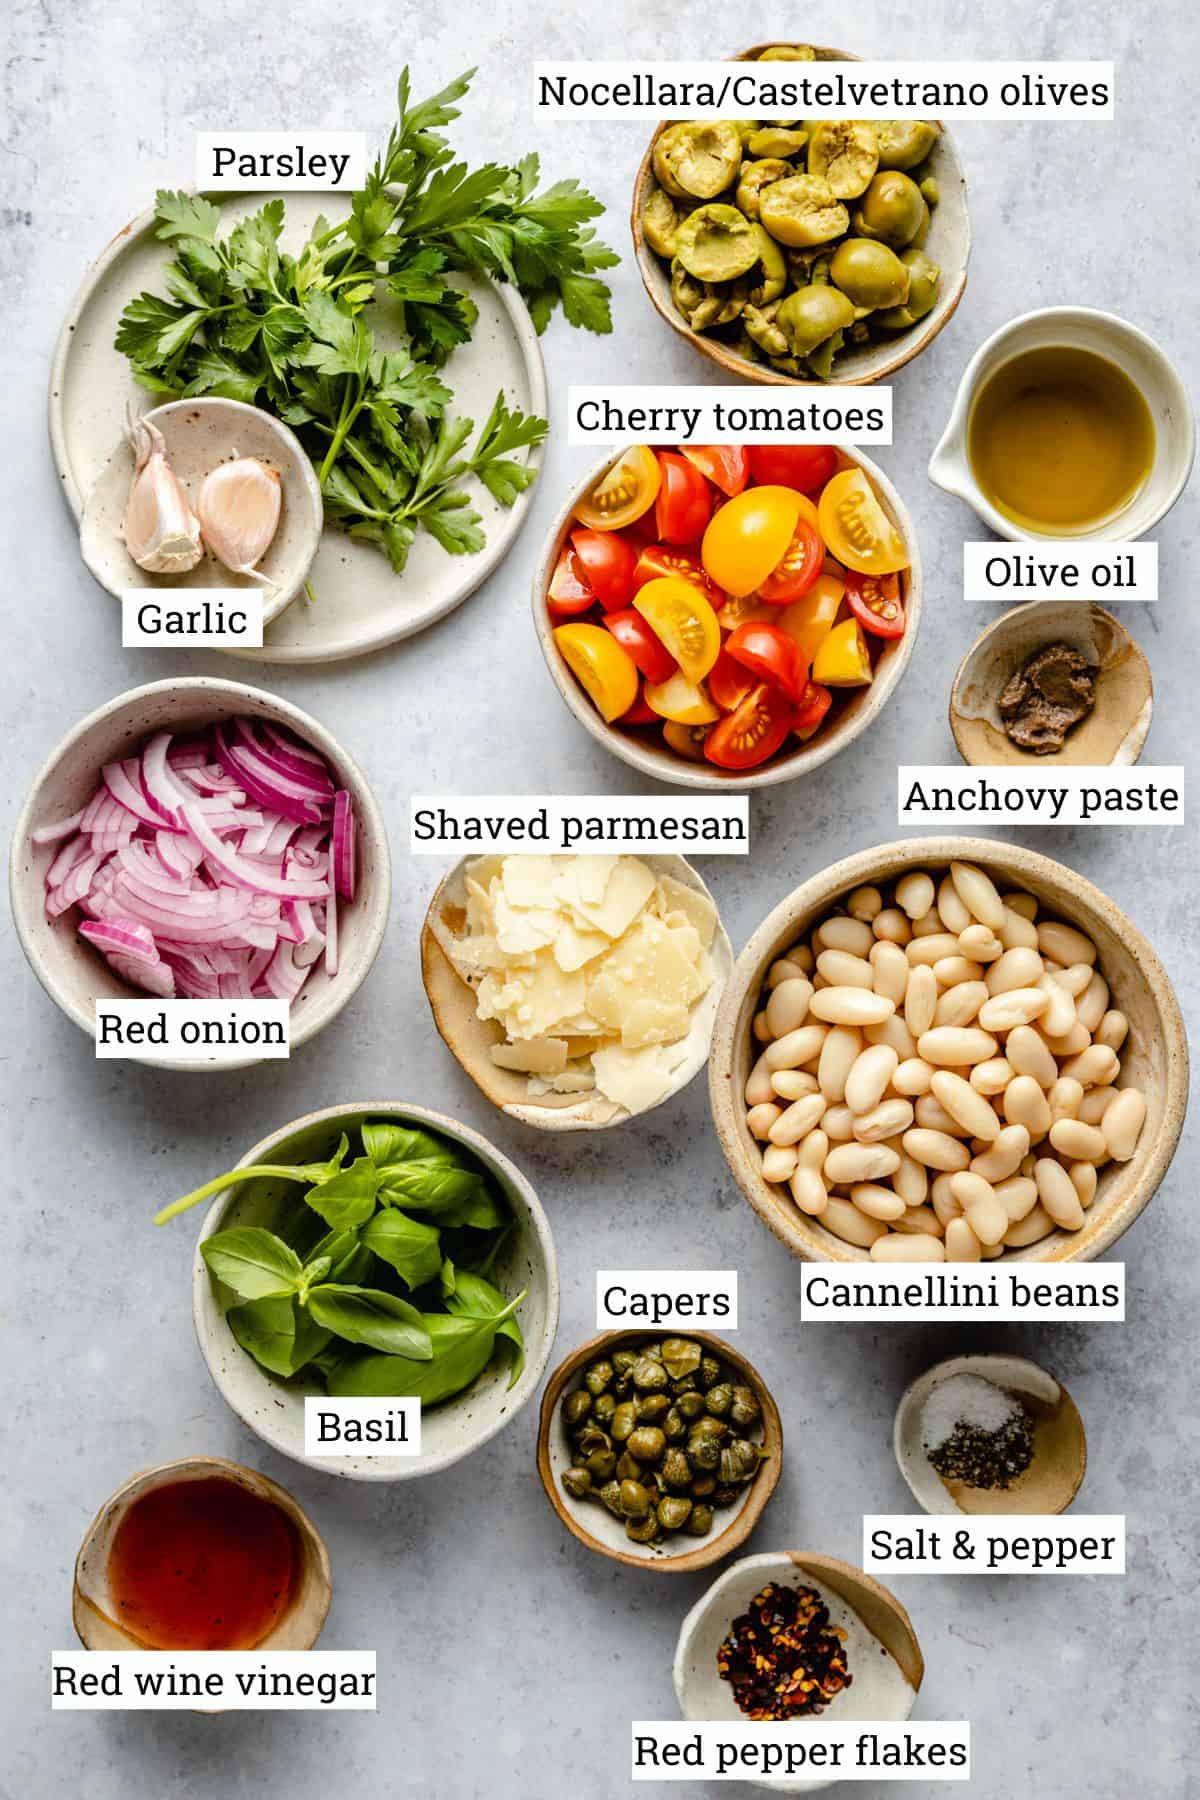 various bowls on a grey background containing the ingredients needed to make the salad.